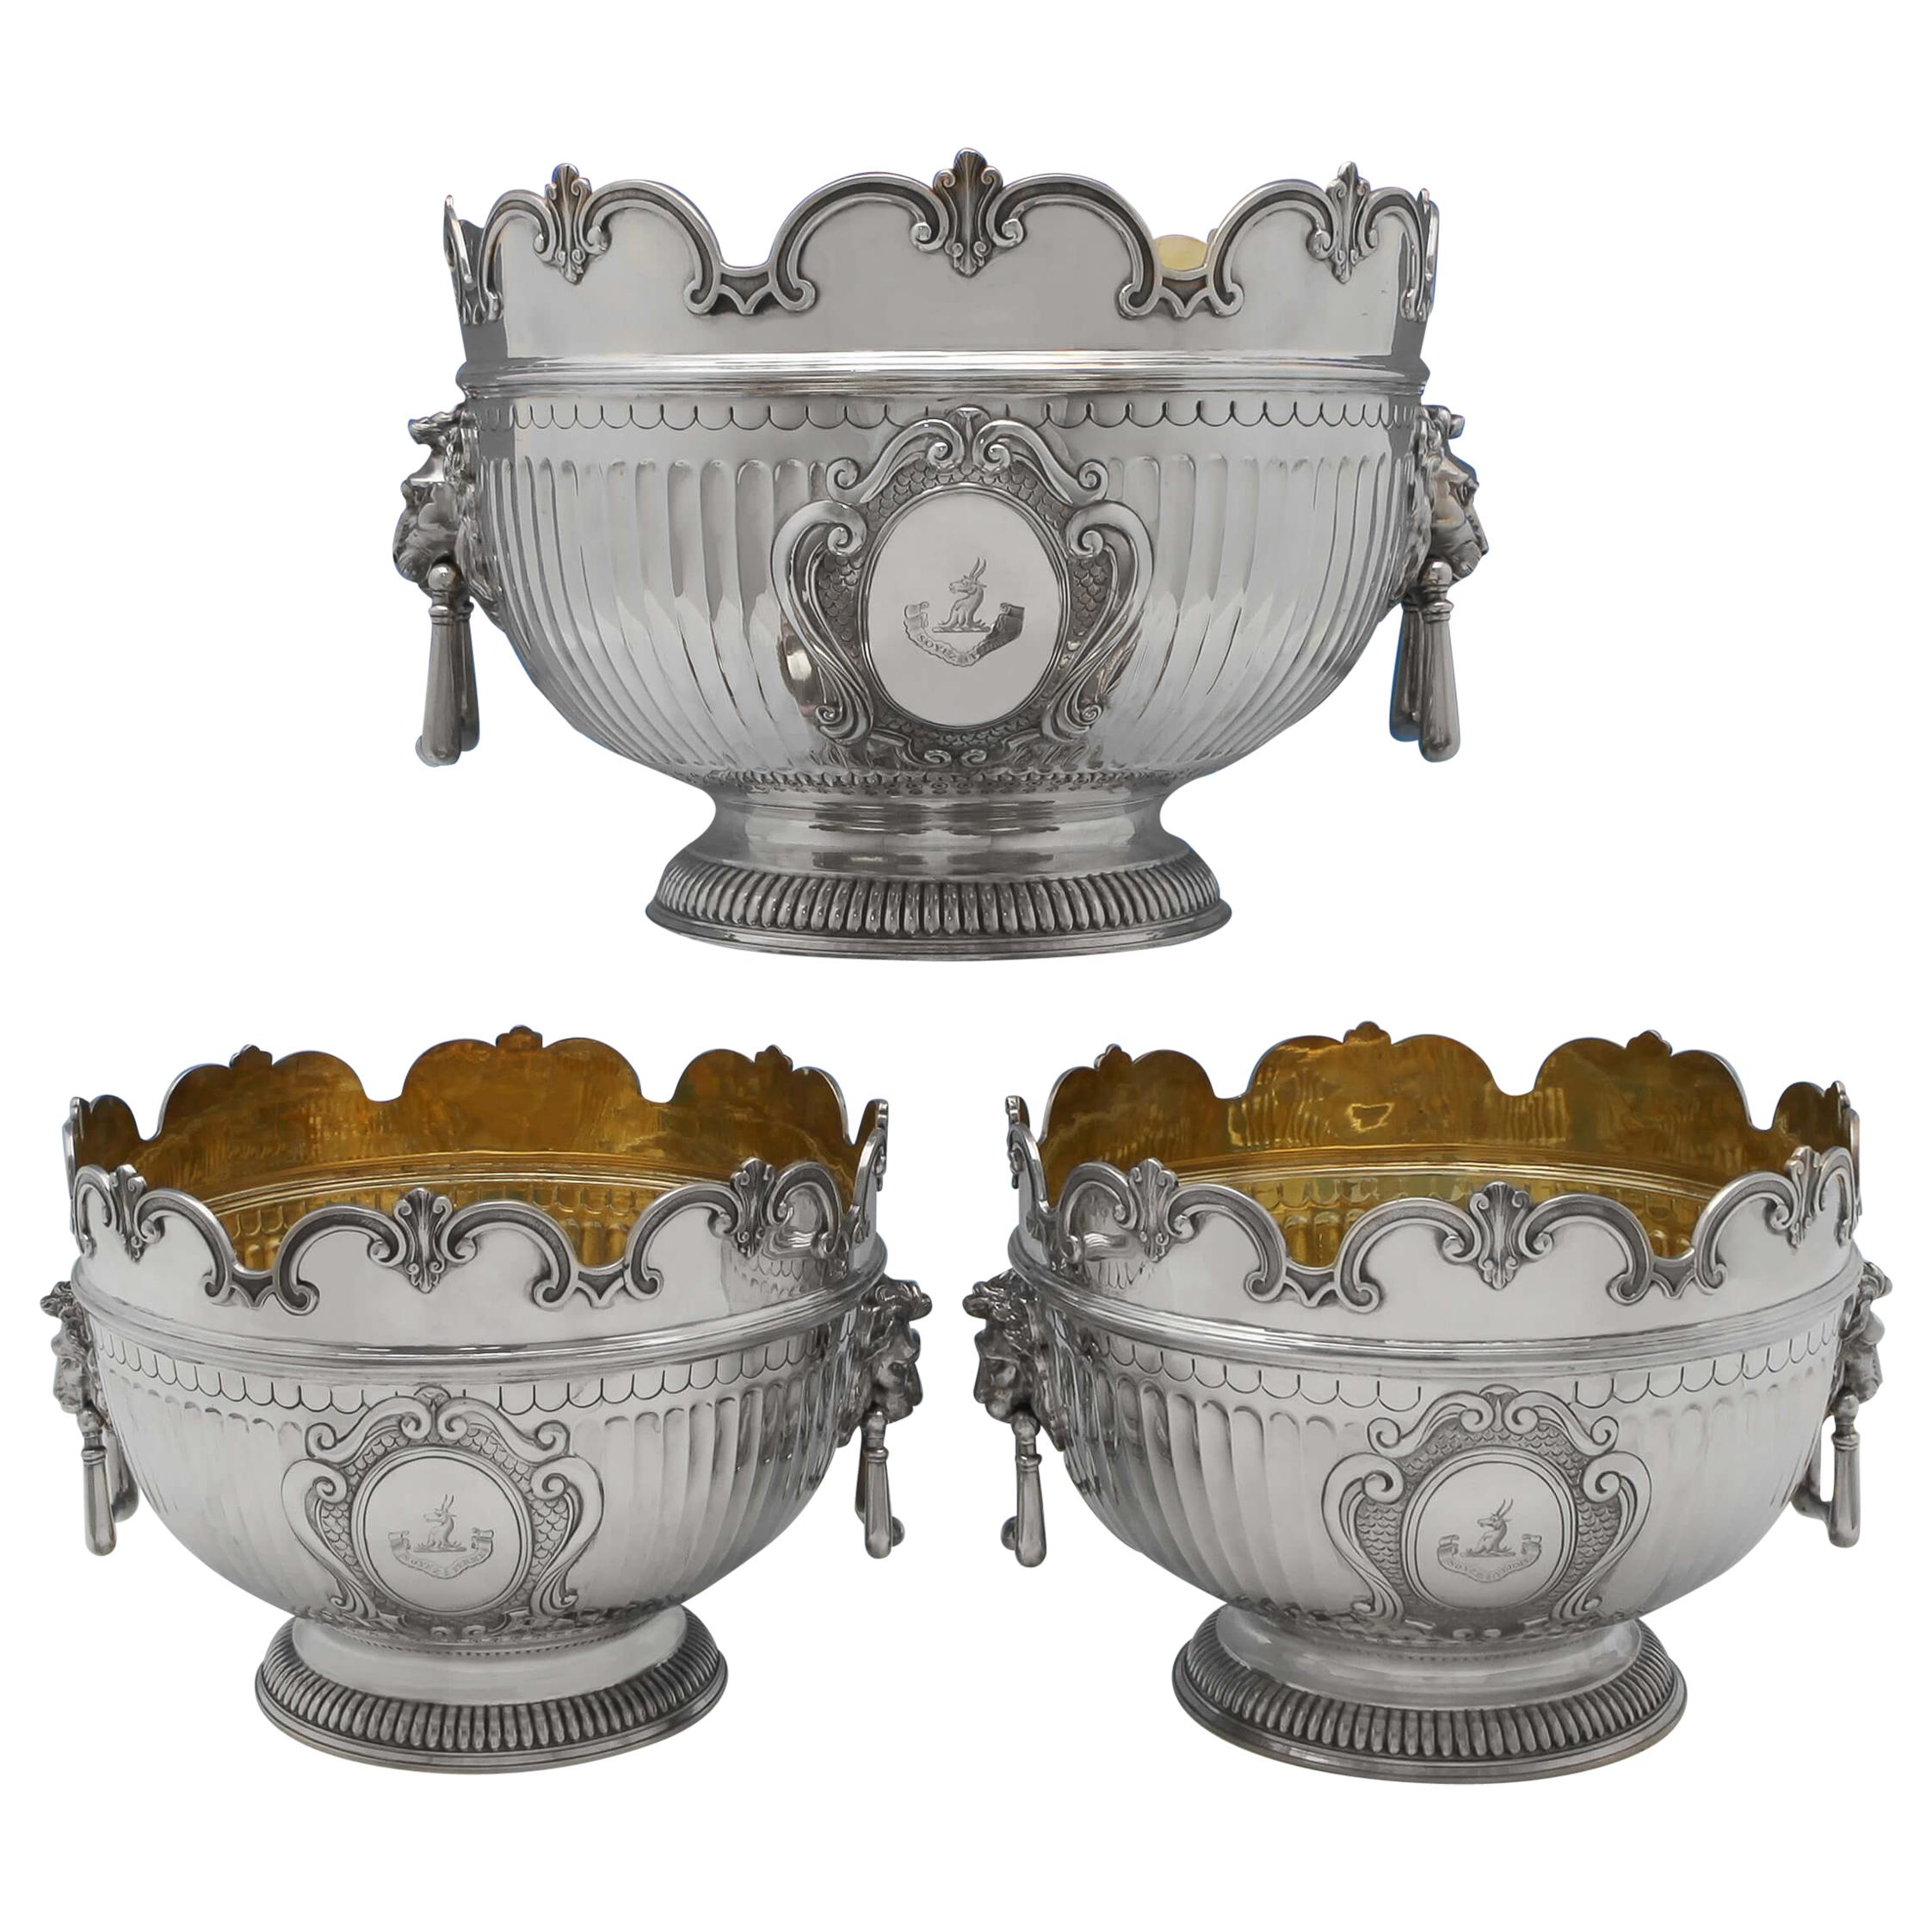 Antique Sterling Silver Centrepiece Suite of 3 'Monteith' Bowls by Barnards